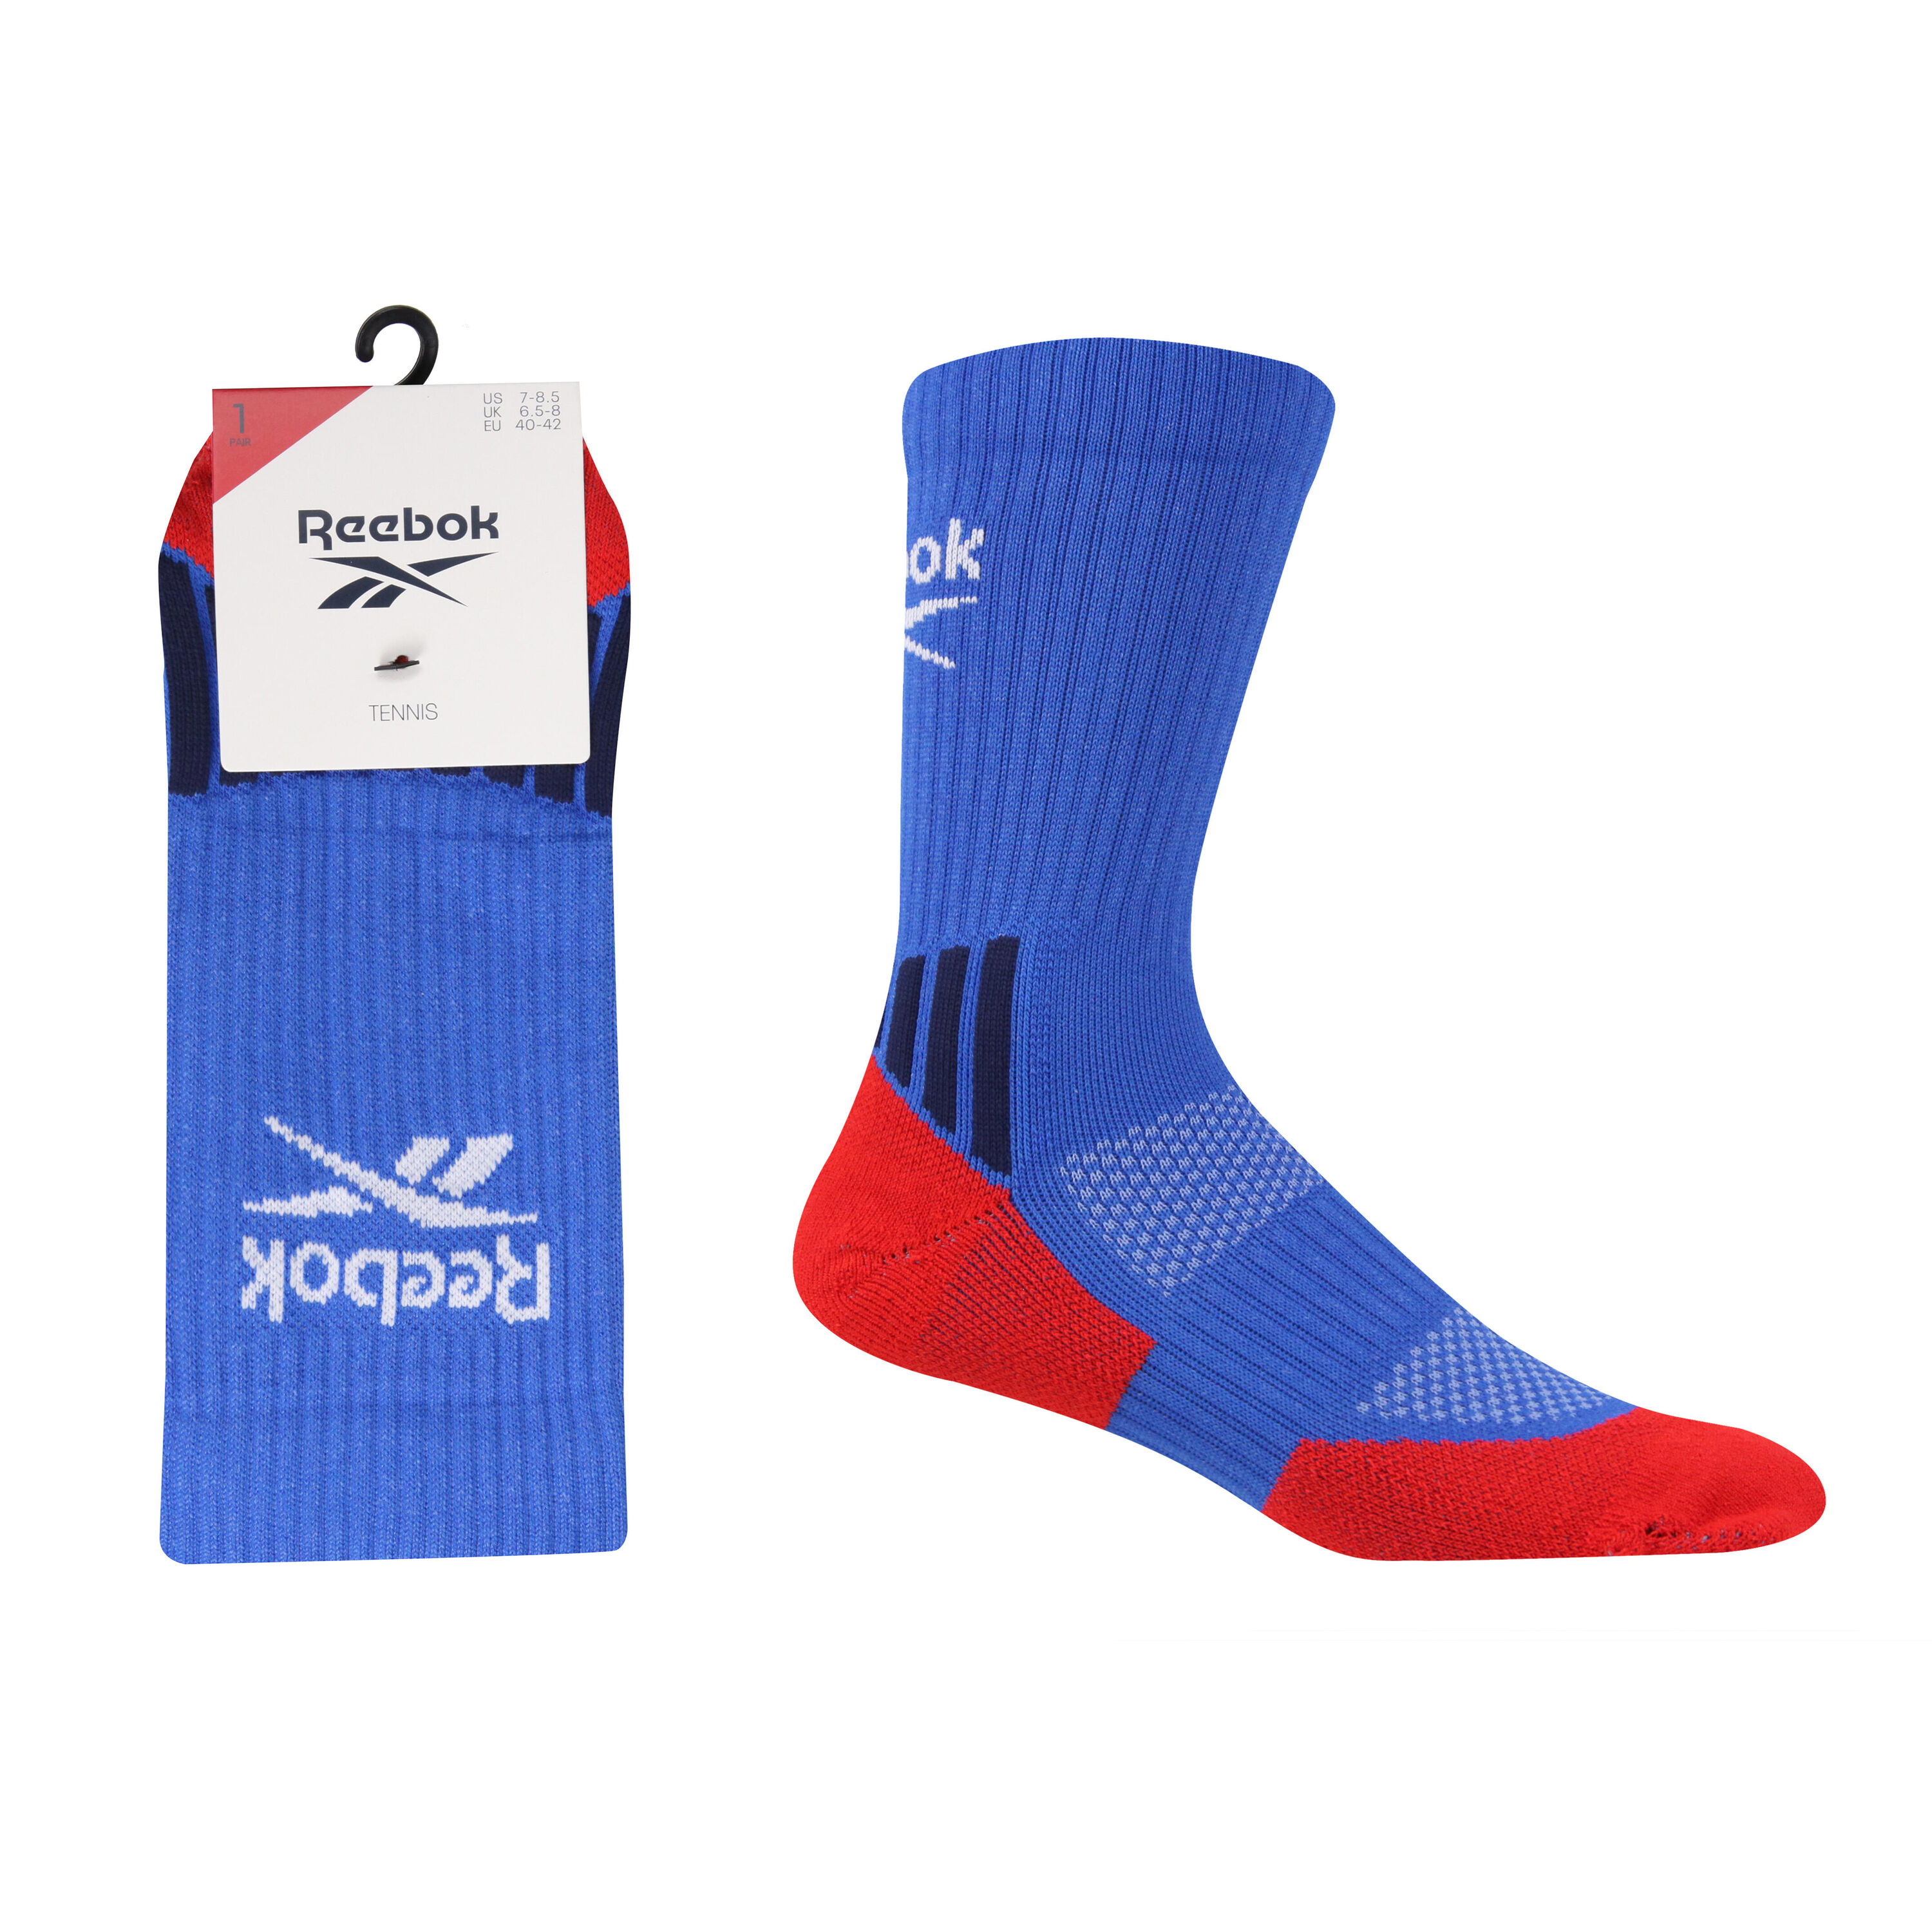 REEBOK 1 Pack Tennis Socks With Full Elastic Compession, Ankle and Arch Support